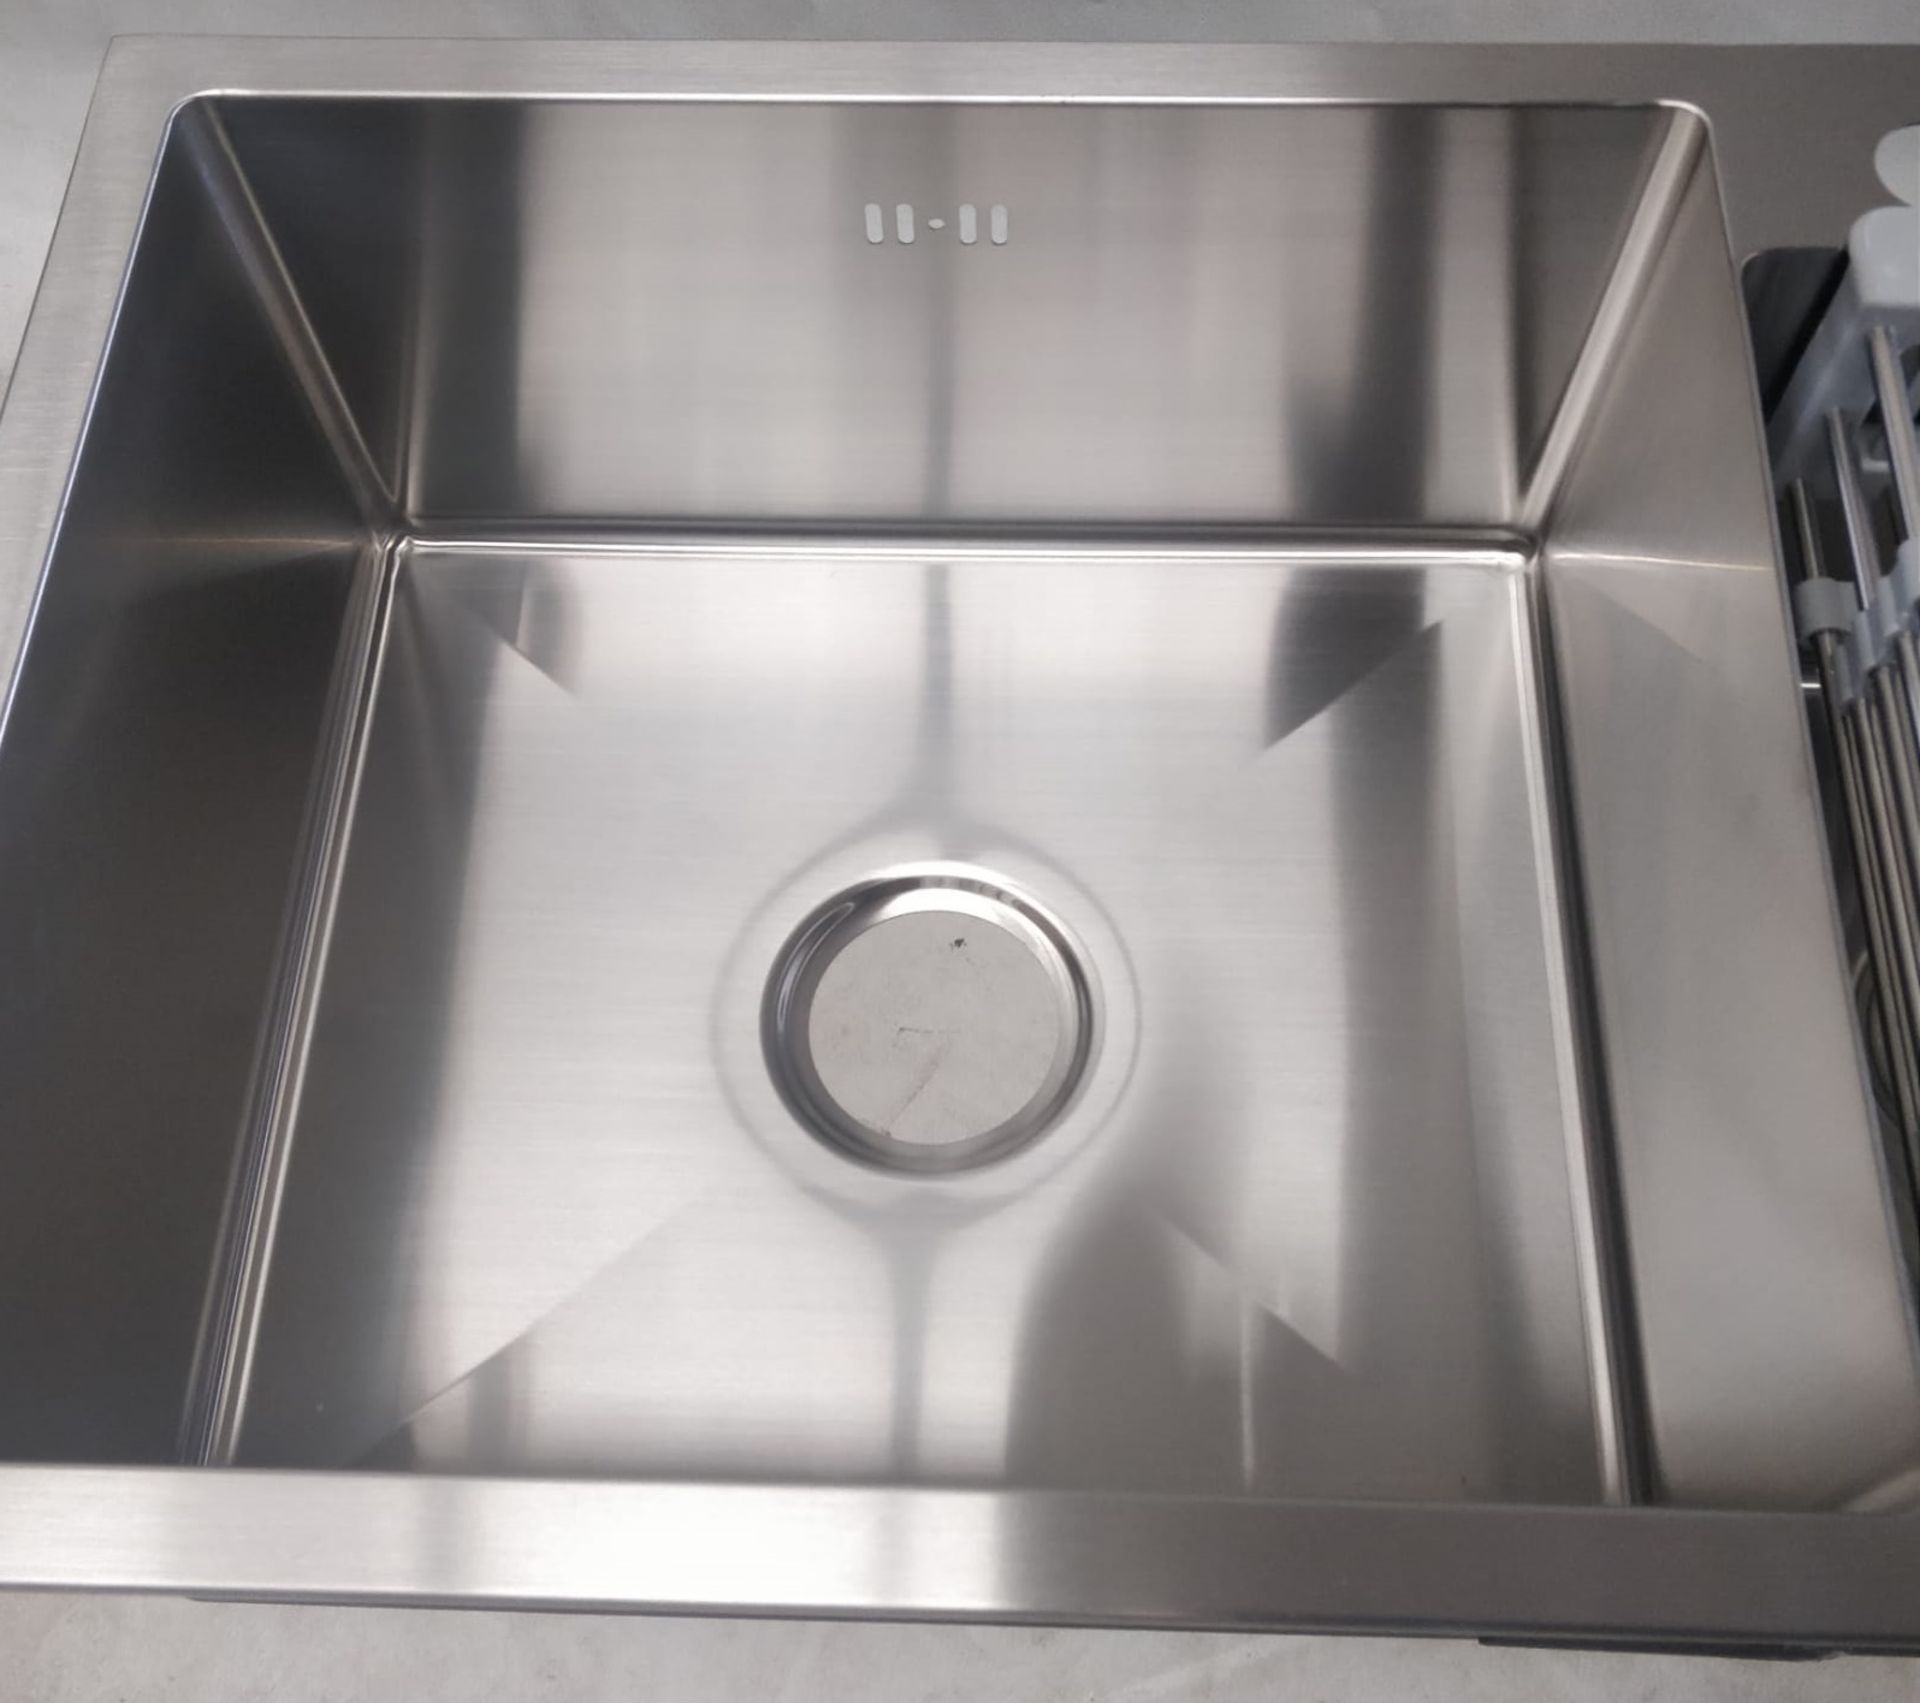 1 x Twin Bowl Contemporary Kitchen Sink Basin - Stainless Steel Finish - Model KS0059 - Includes - Image 2 of 16